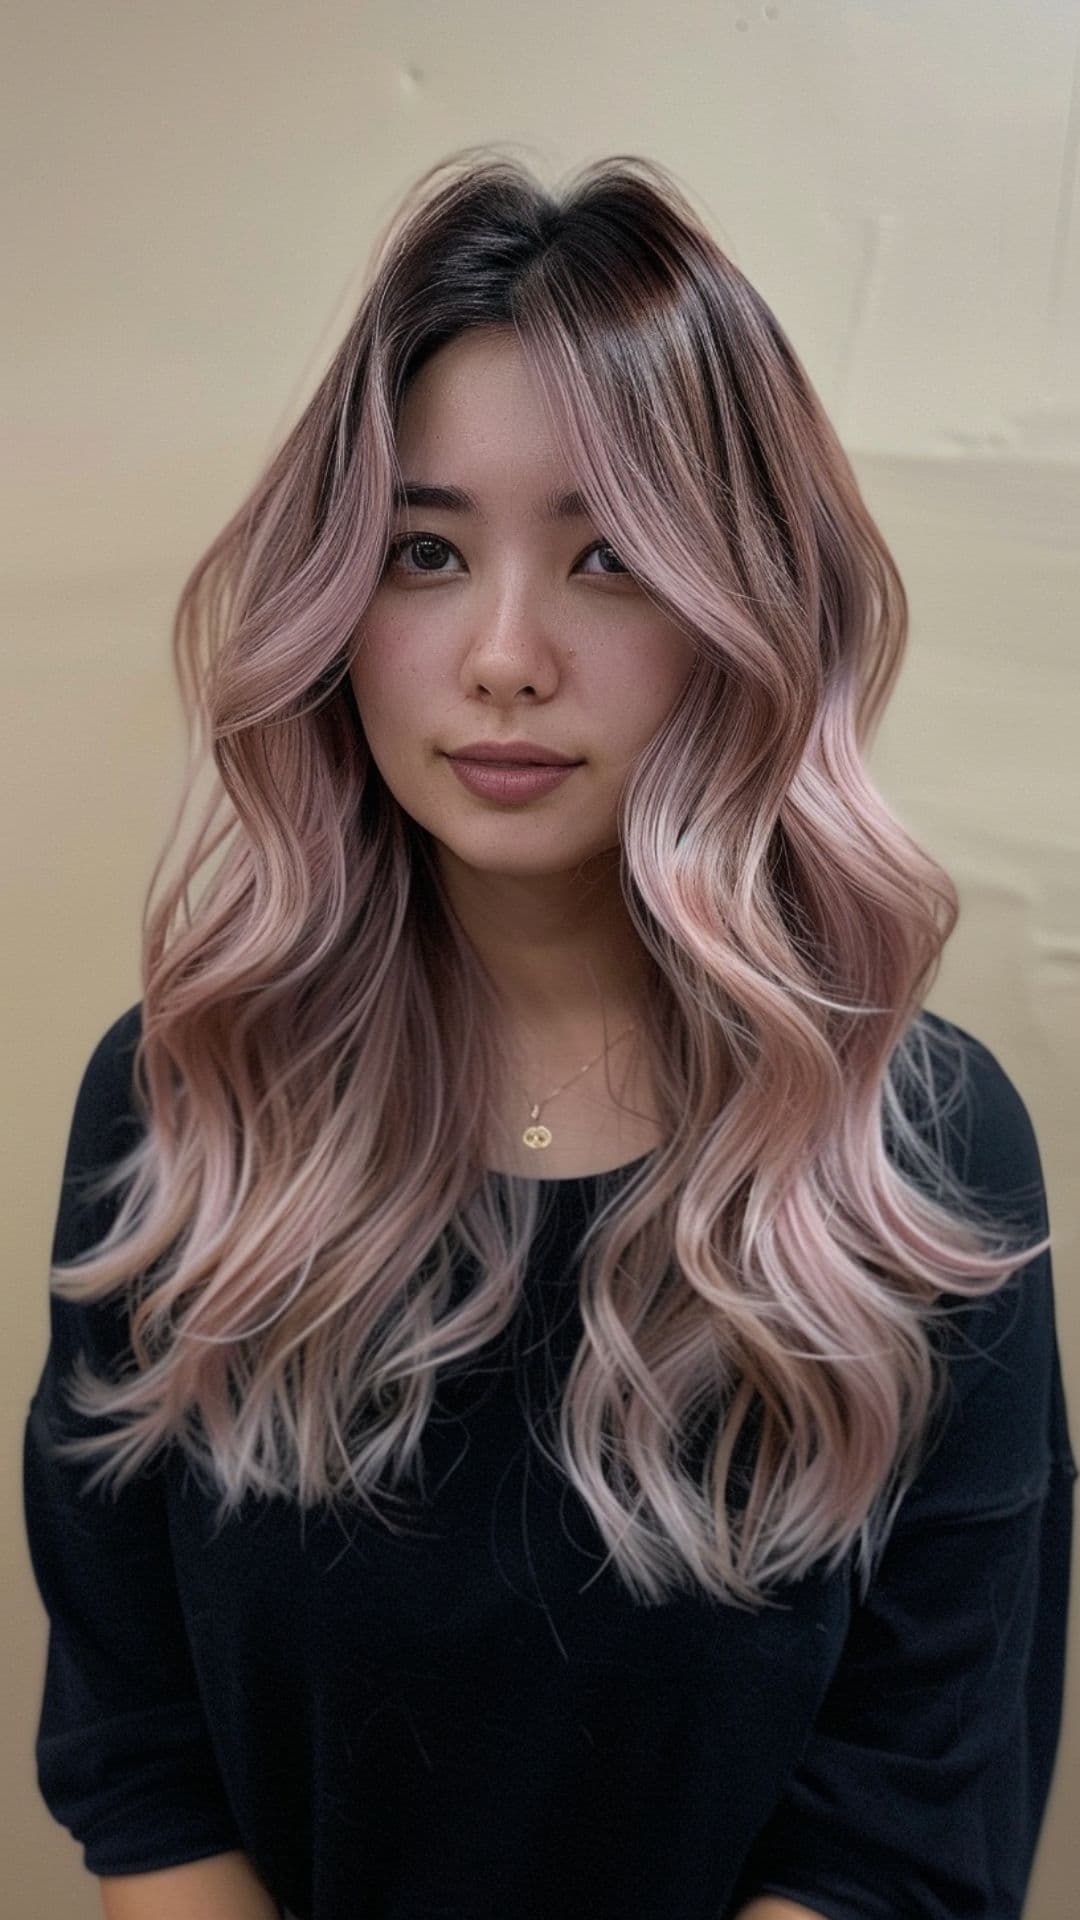 A woman modelling a dusty pink hair with shadow root.